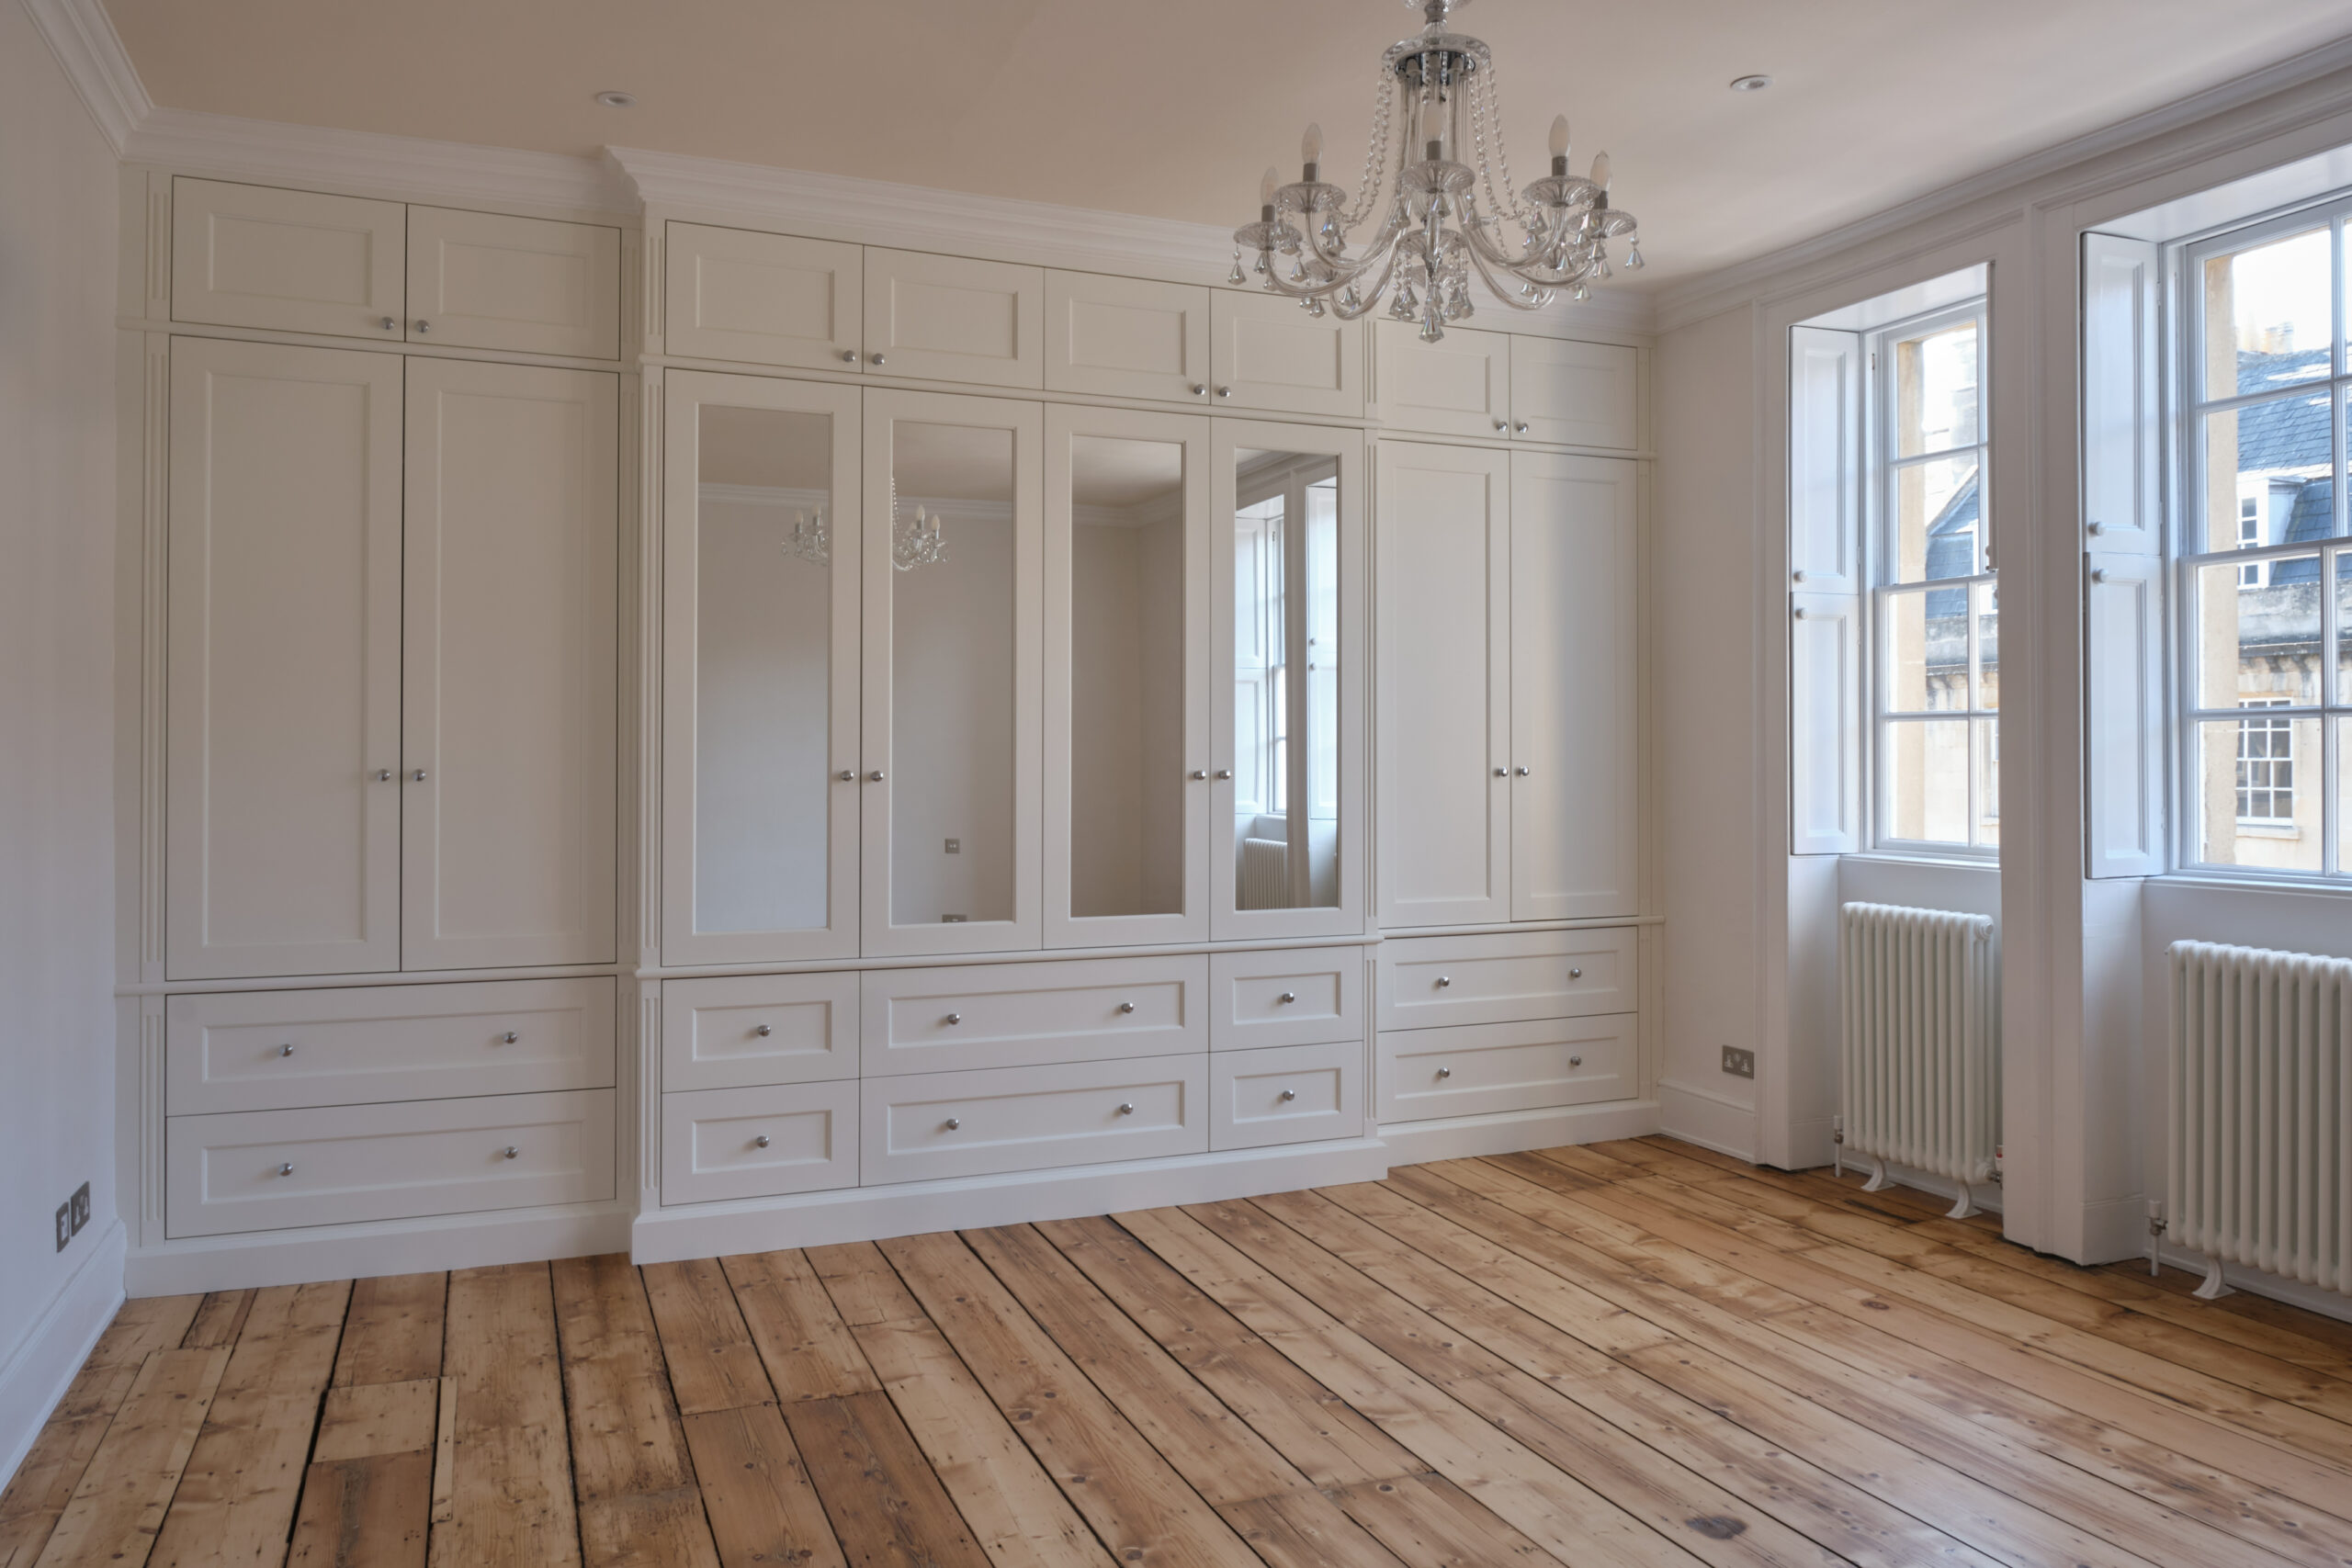 Bespoke, built-in, traditional style wardrobes